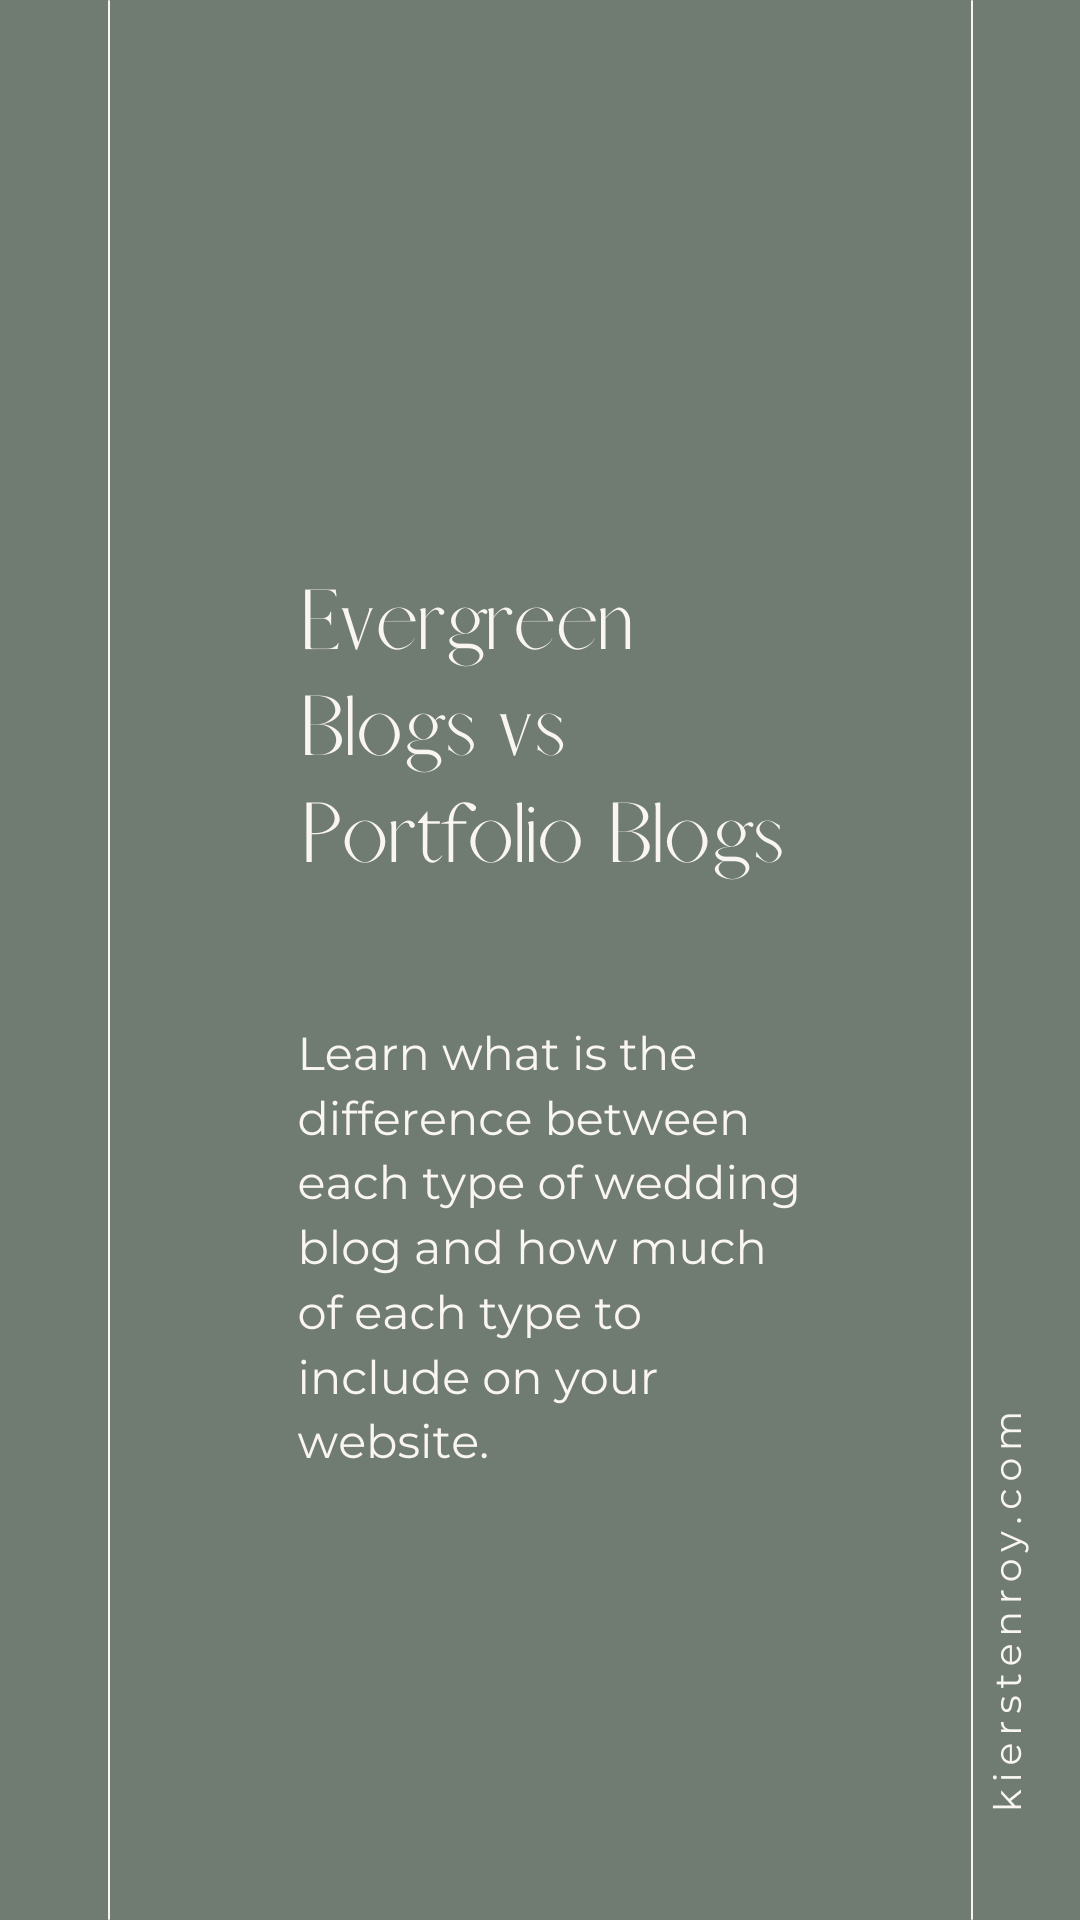 Evergreen Blogs vs Portfolio Blogs: What’s the Difference?